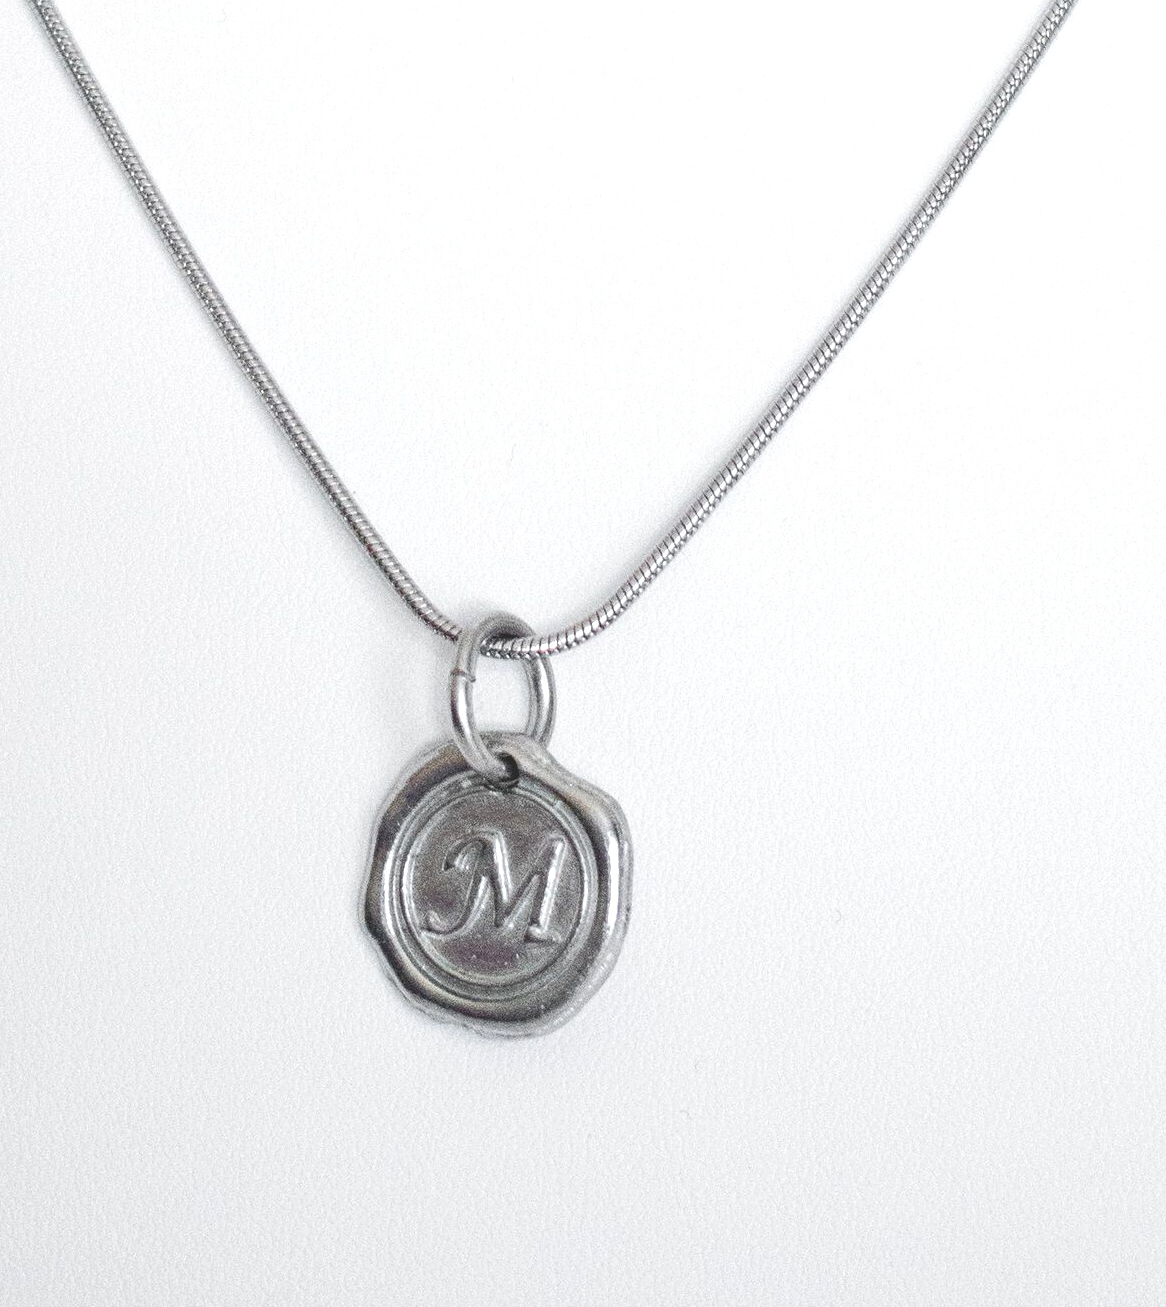 Handmade pewter wax seal necklace